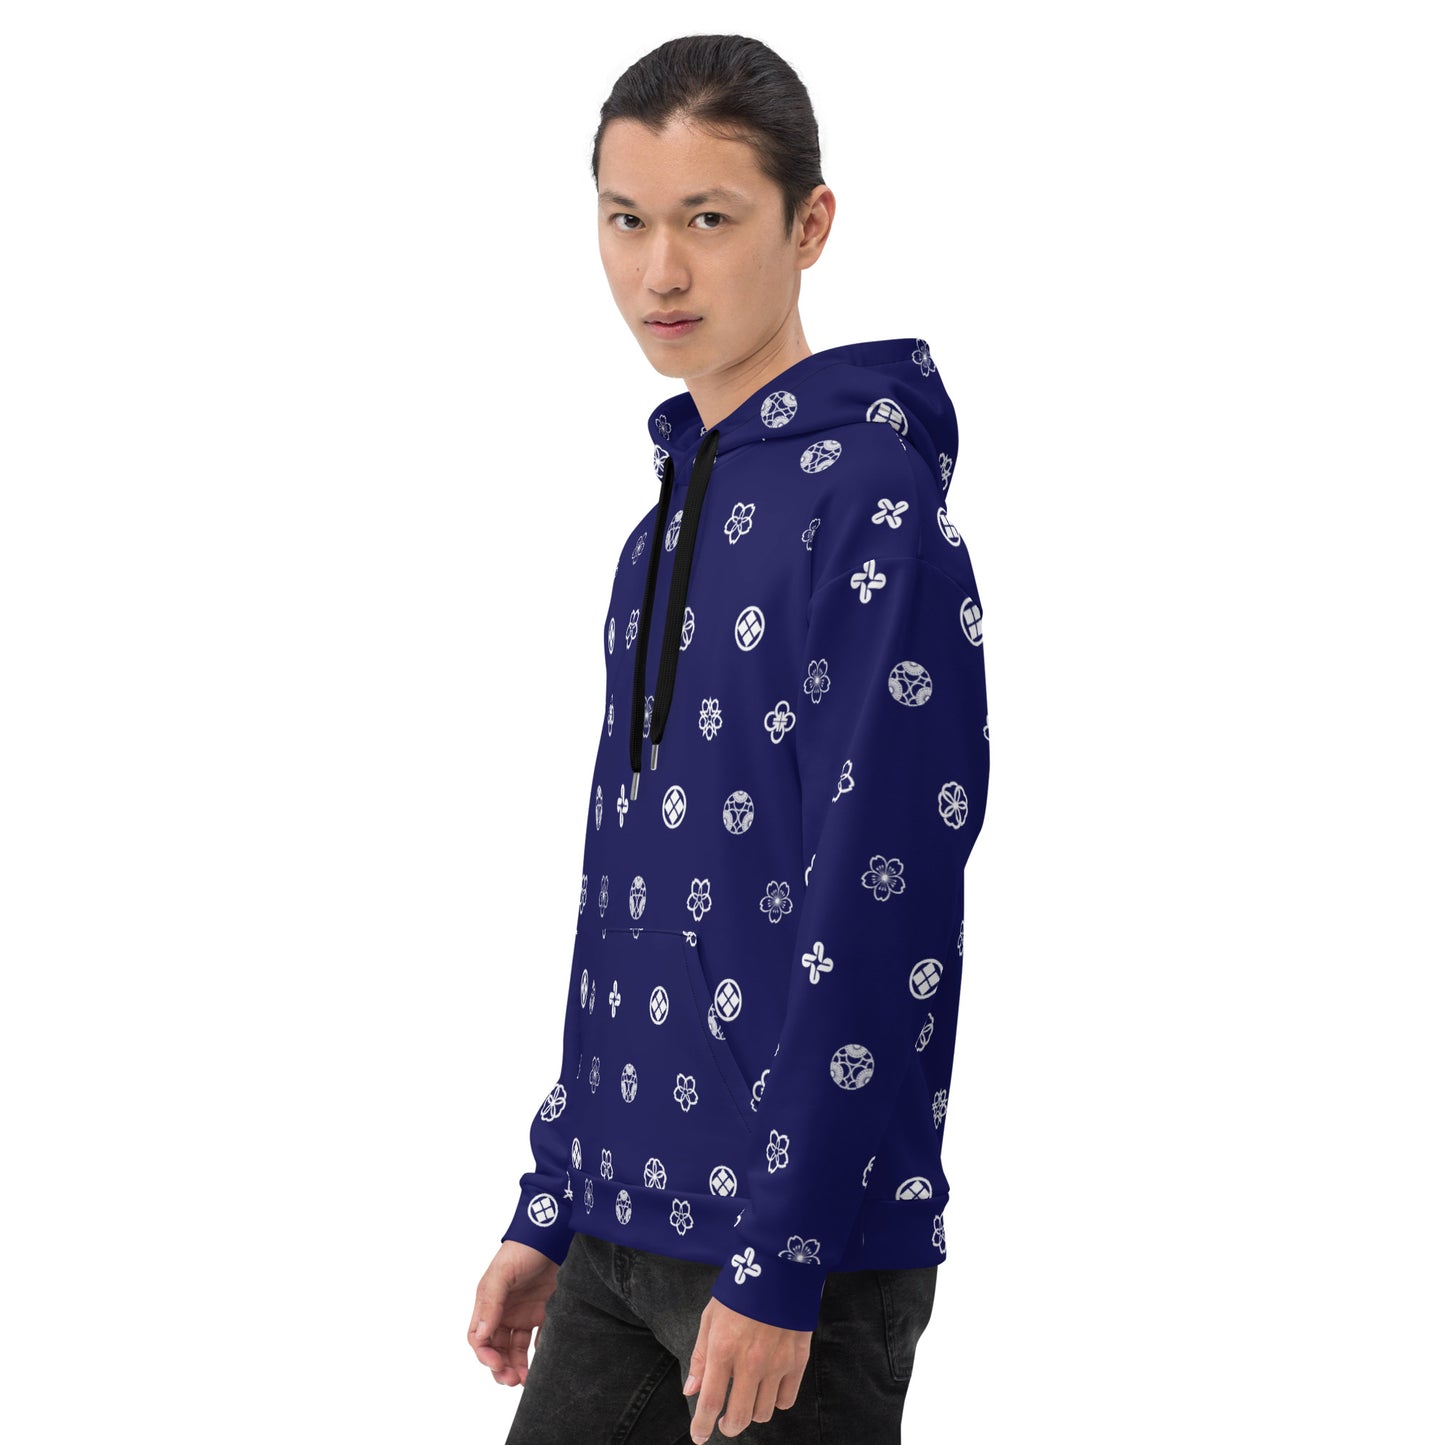 Japanese Crest Icon Hoodie